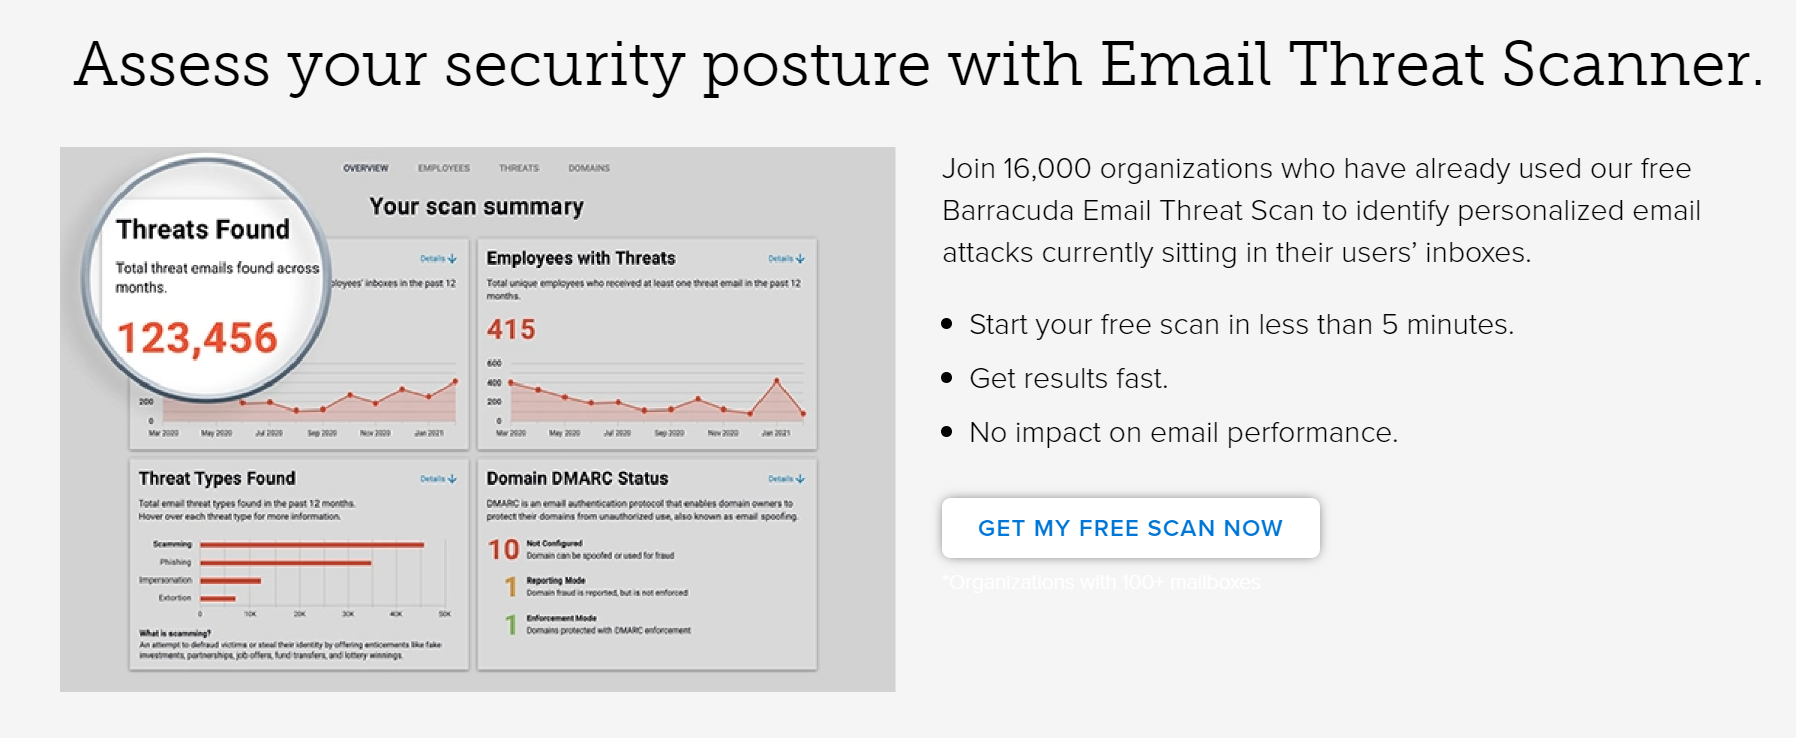 The Barracuda anti-phishing landing page also includes a link to a free email scanner tool.